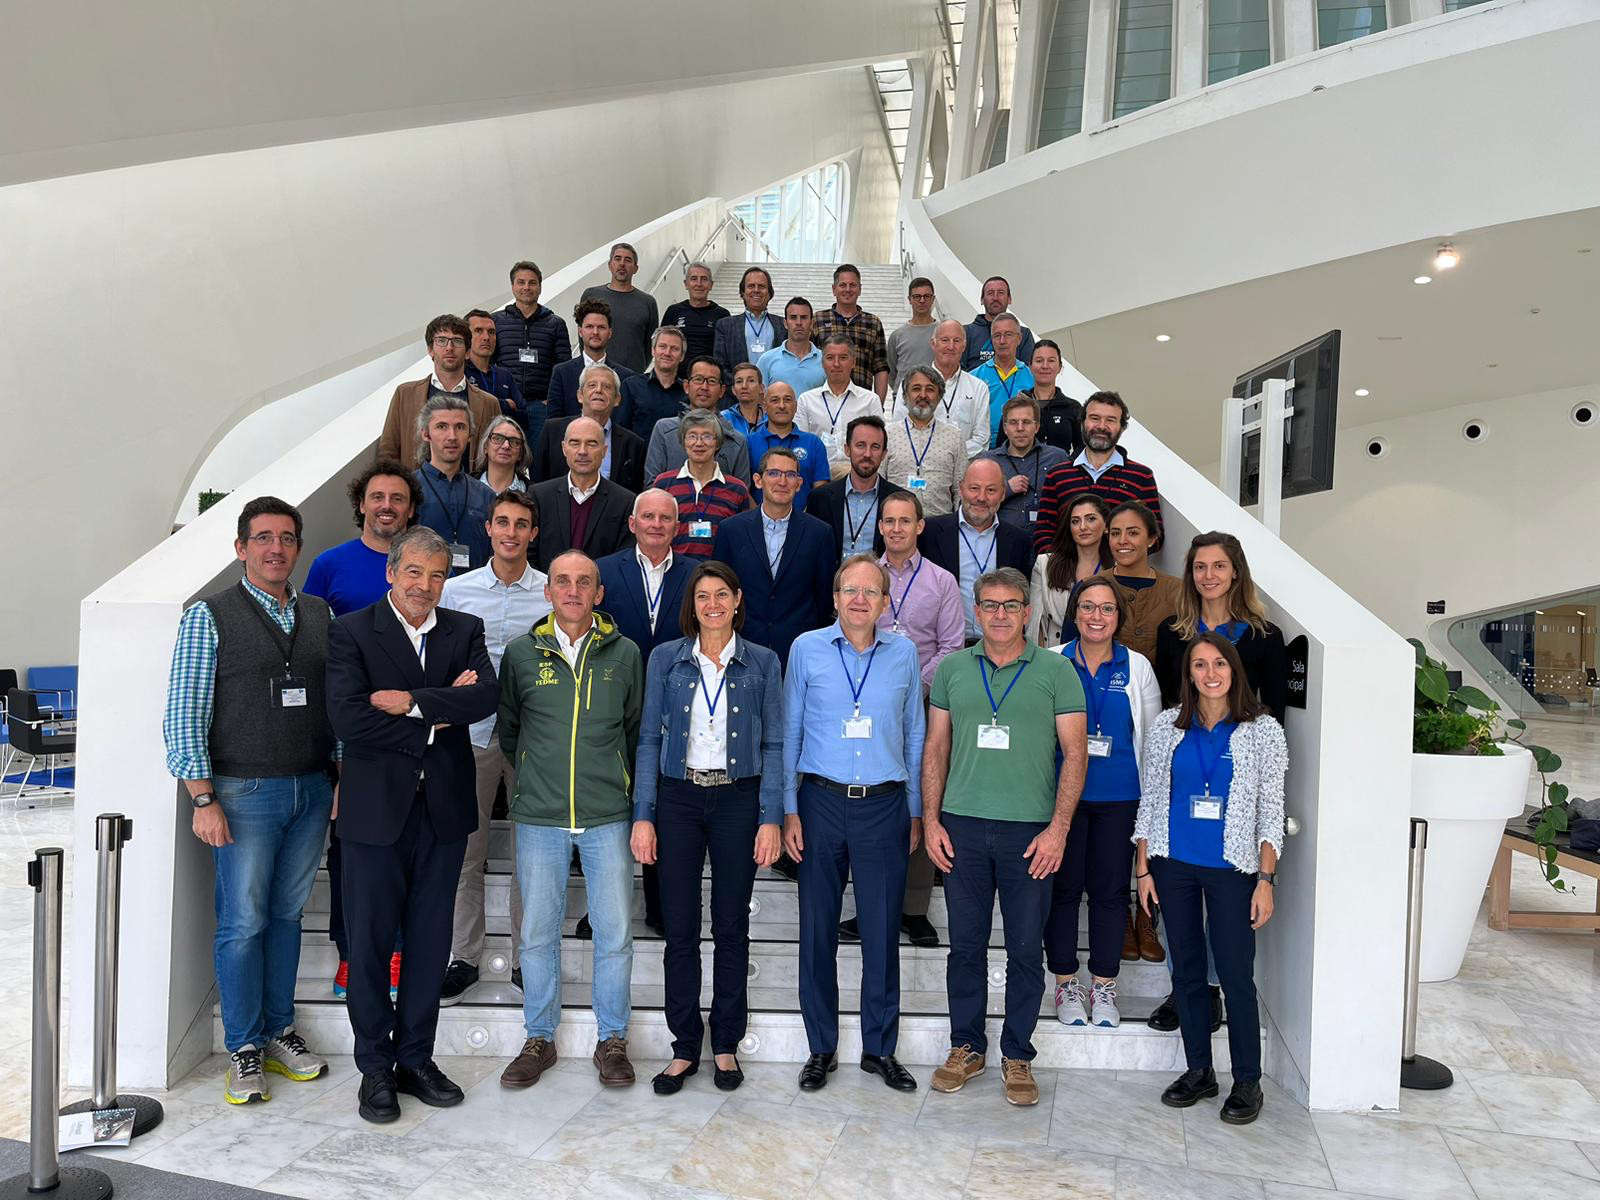 Oviedo was the venue for the International Ski Mountaineering Federation Plenary Assembly ©ISMF